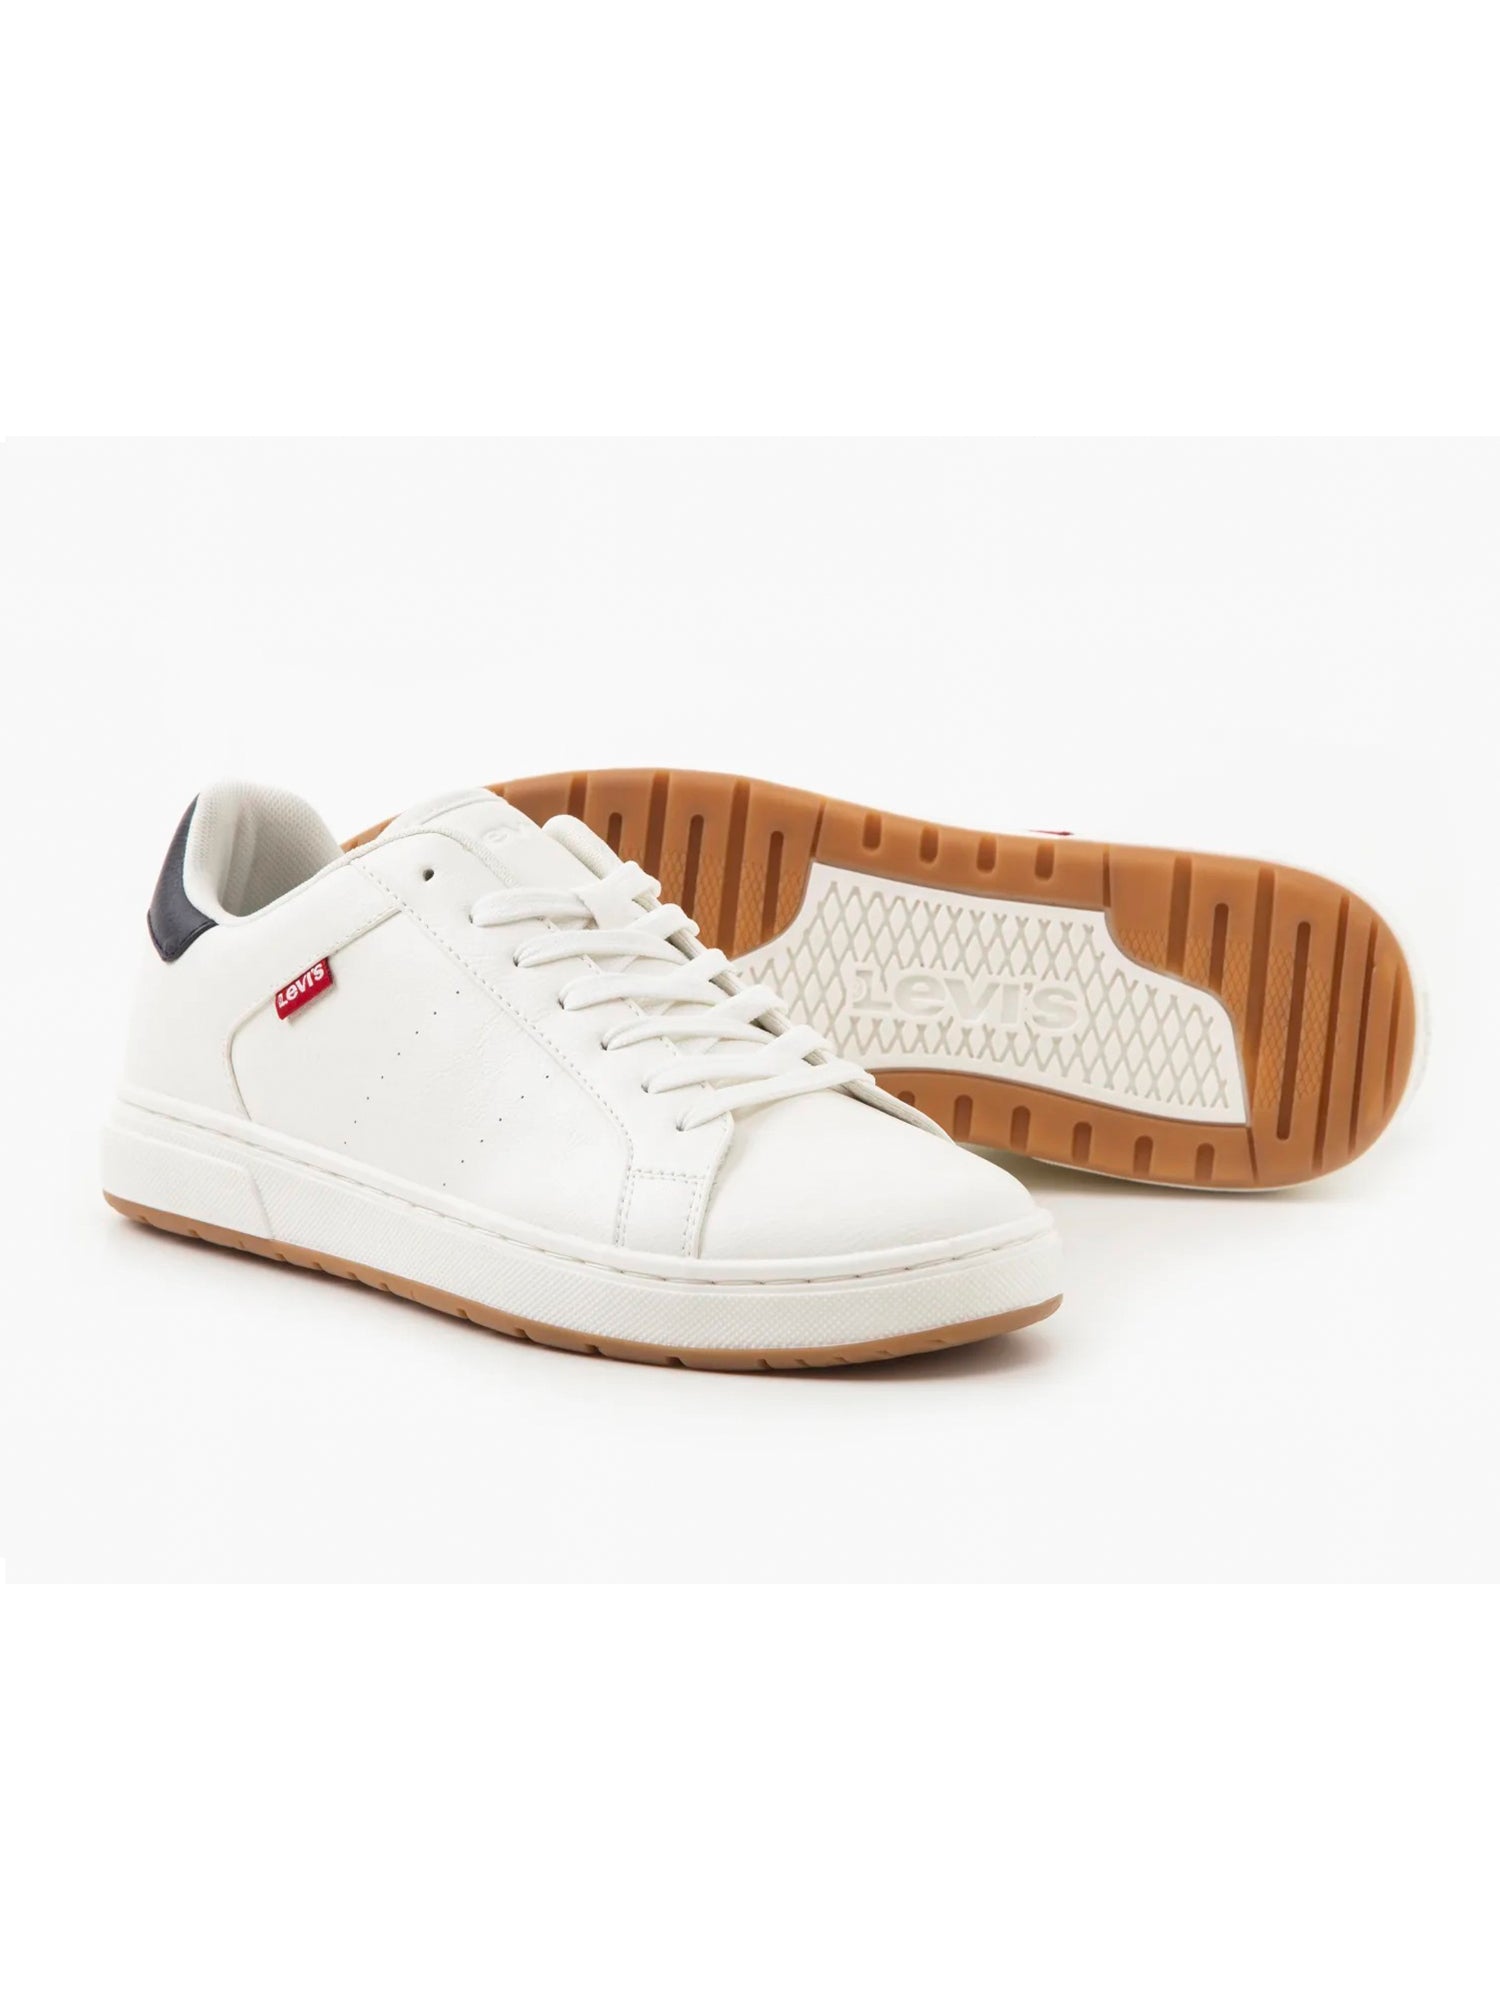 Levi's Womens Woods W White Plain Sneakers: Buy Levi's Womens Woods W White  Plain Sneakers Online at Best Price in India | Nykaa